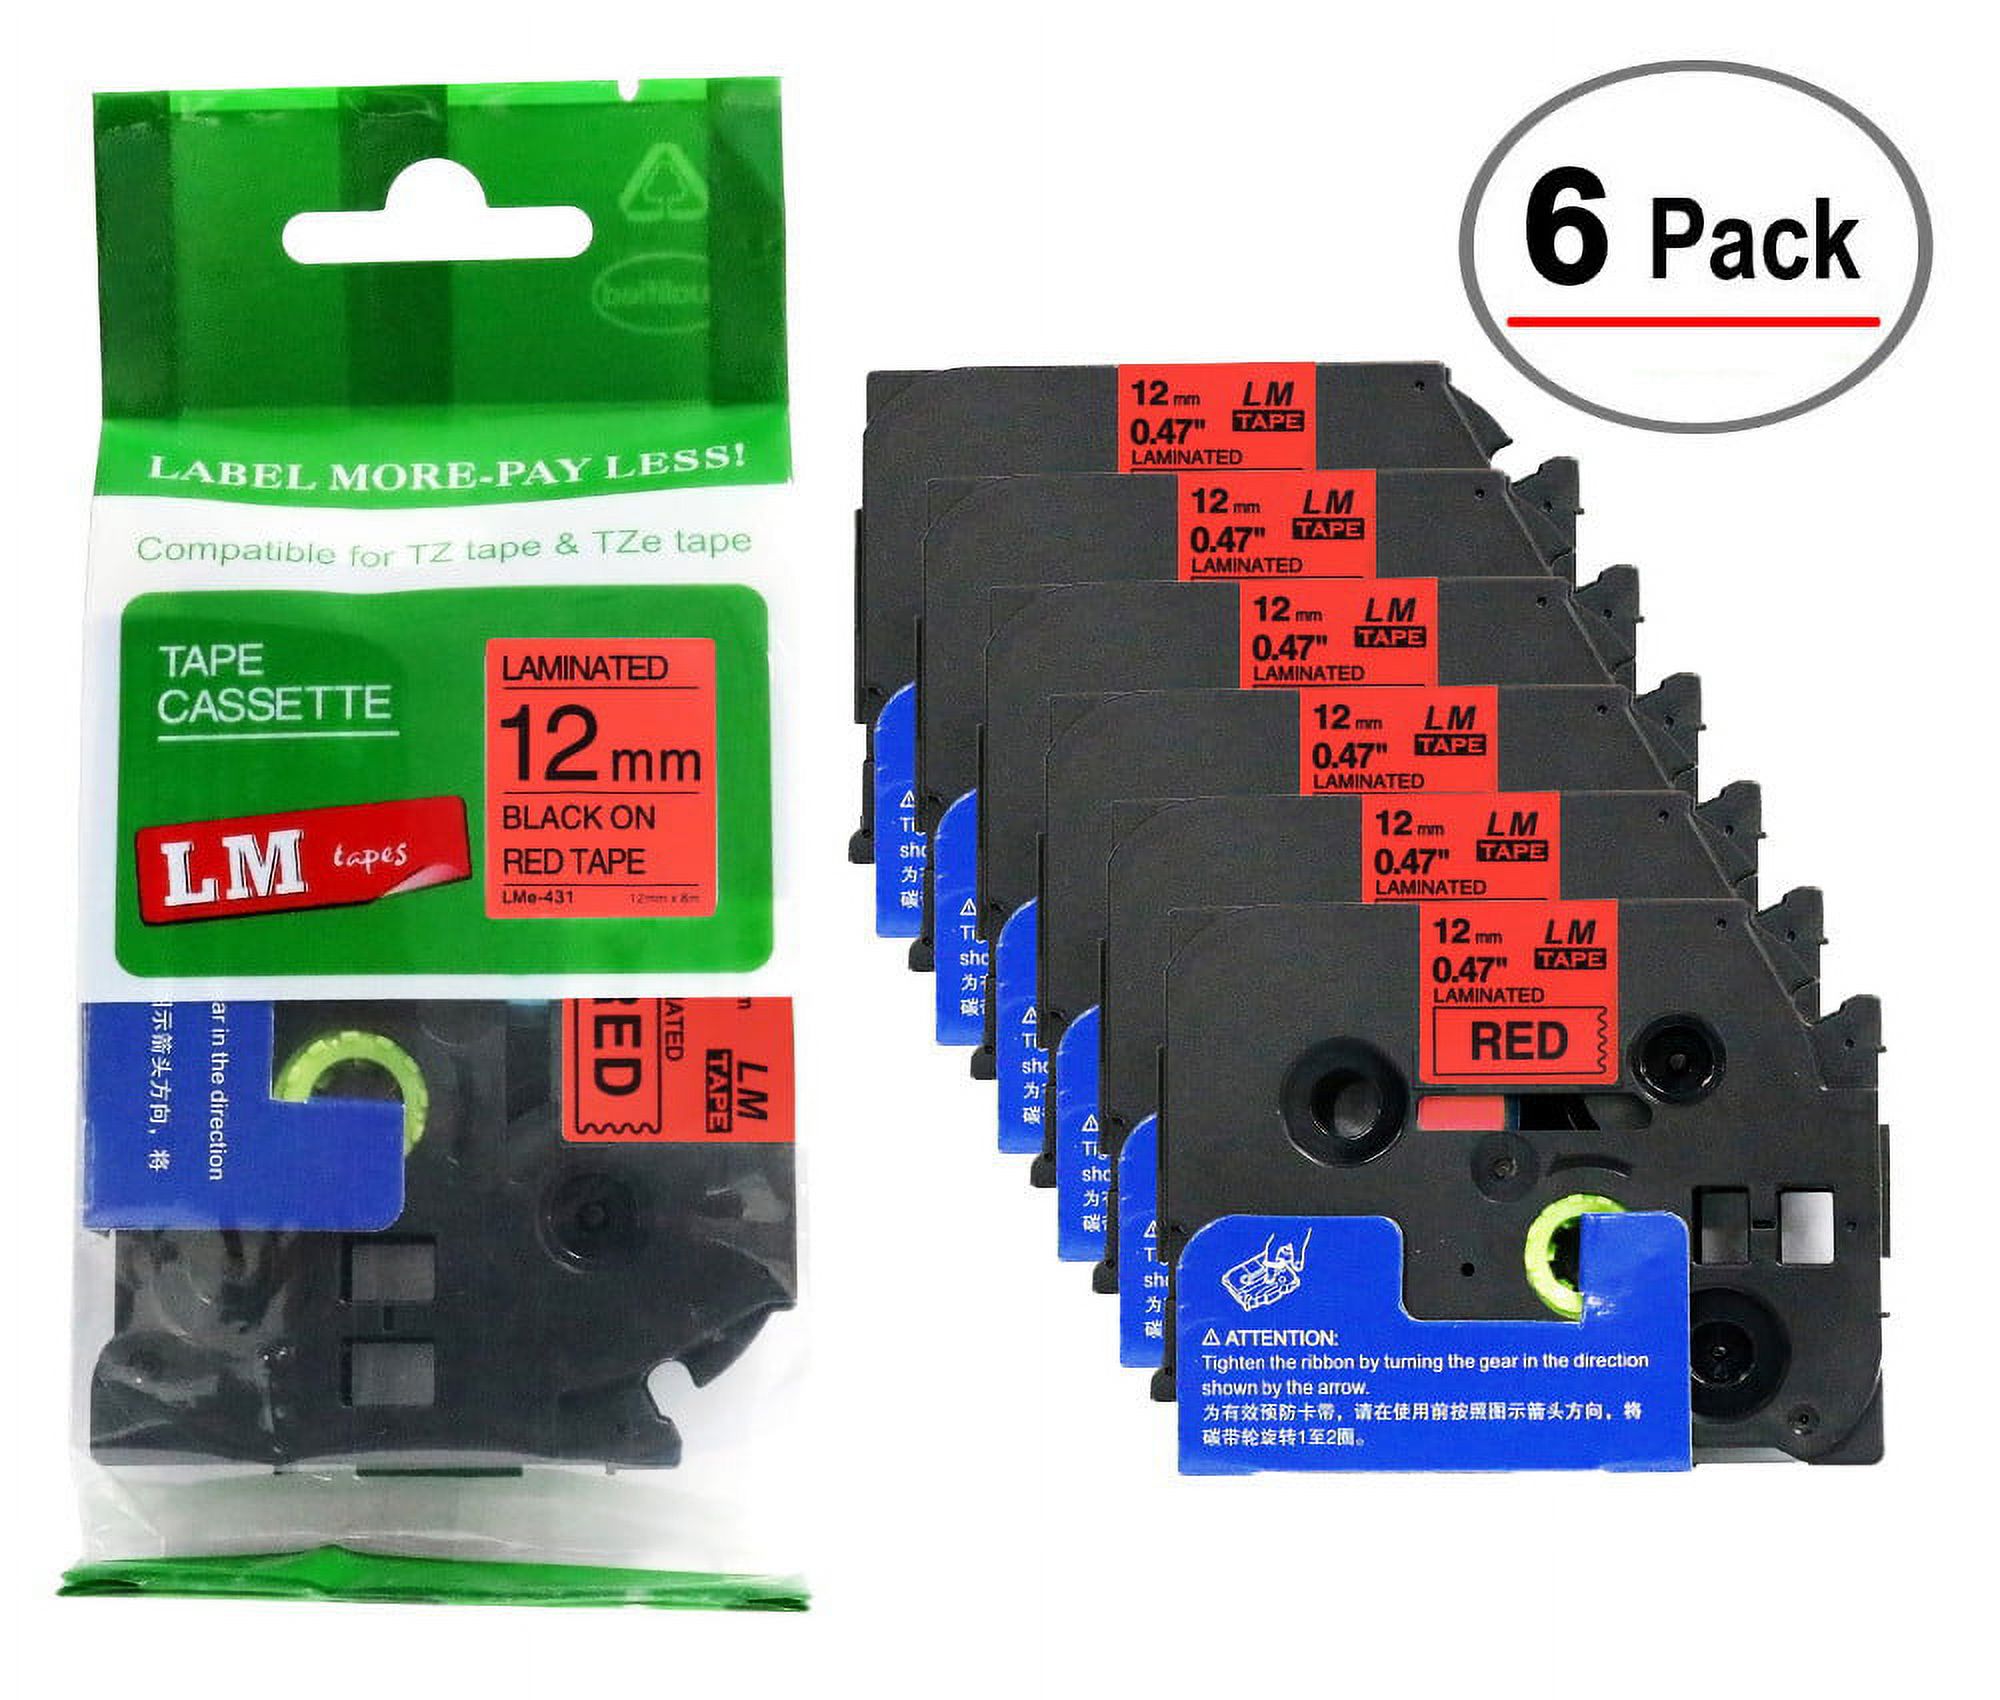 LM Tapes - 6/Pack Premium 1/2" Black Print on Red Label Compatible with TZe-431 Tape TZ-431 comes with Free Tape Color/Size Guide for easy reordering. - image 1 of 2